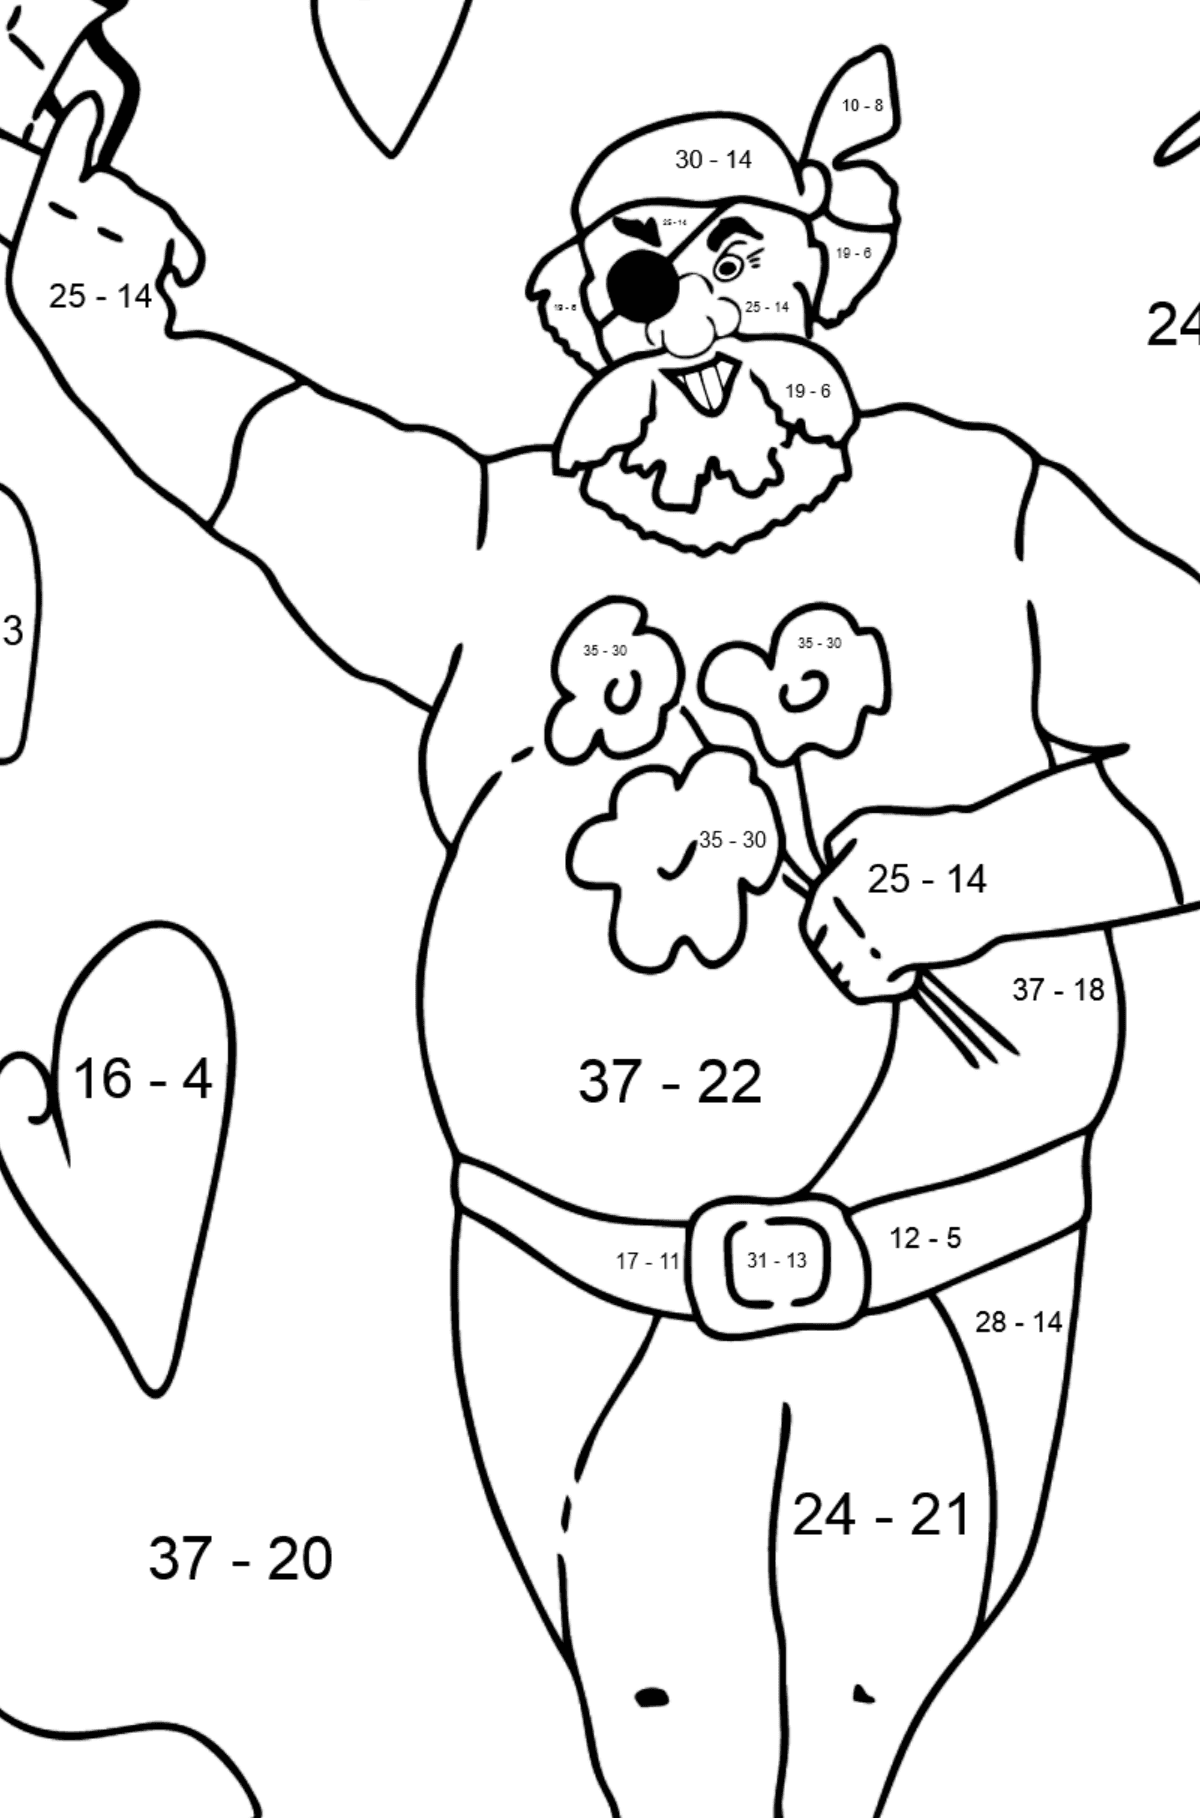 Coloring Page - A Romantic Pirate - Math Coloring - Subtraction for Kids